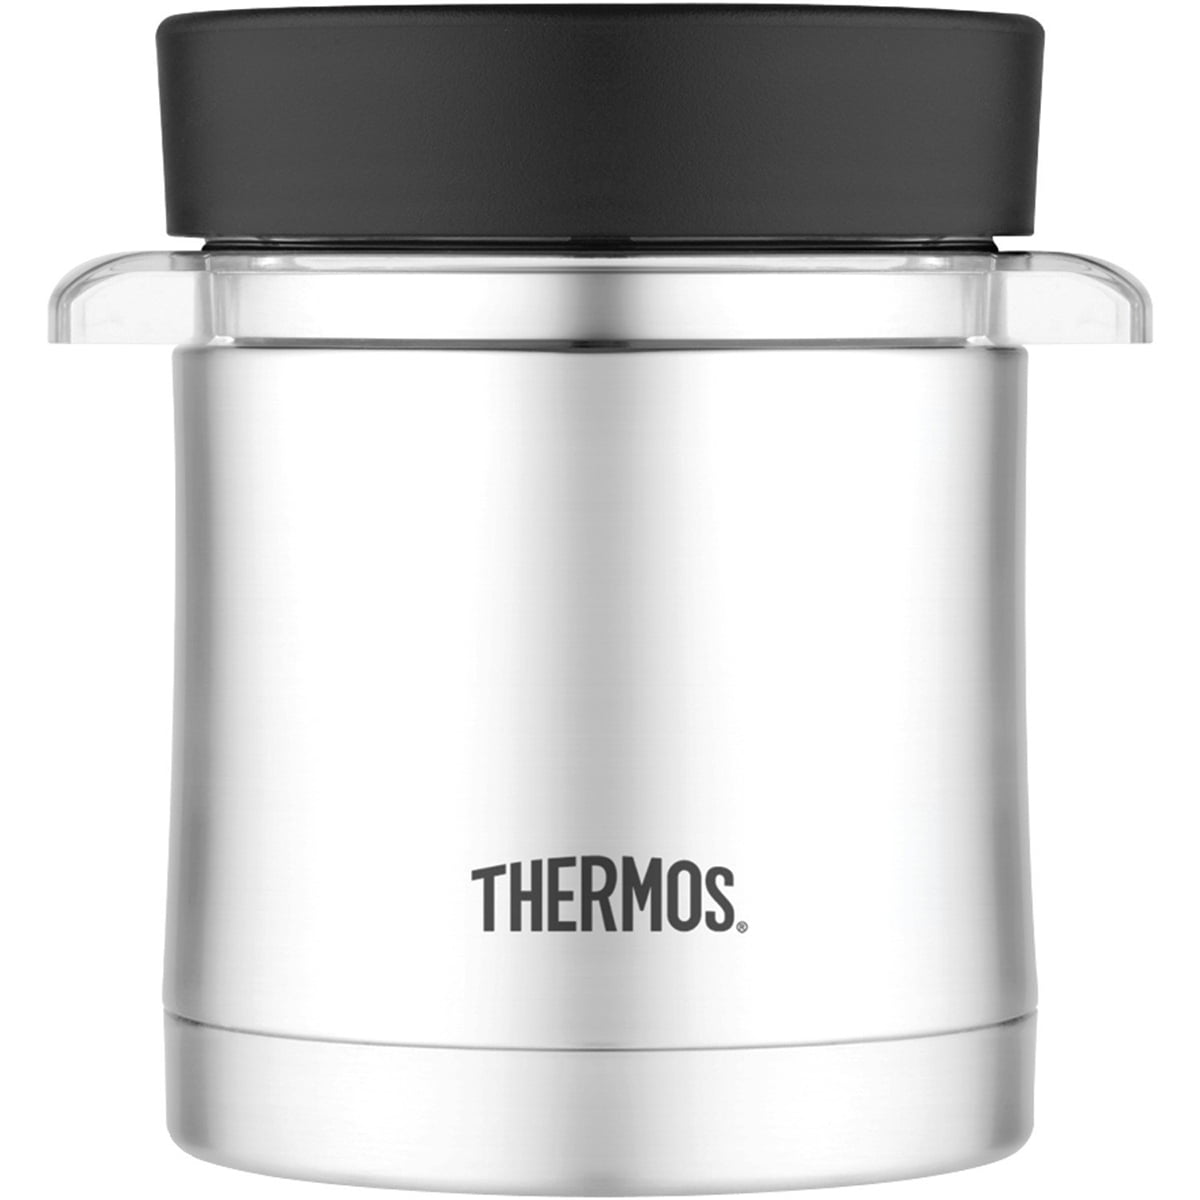 Immekey 34 OZ1LVacuum Thermos with Celsius Temperature Display Lid, 48 Hour Heat Retention,Green, Size: 1.3 Large